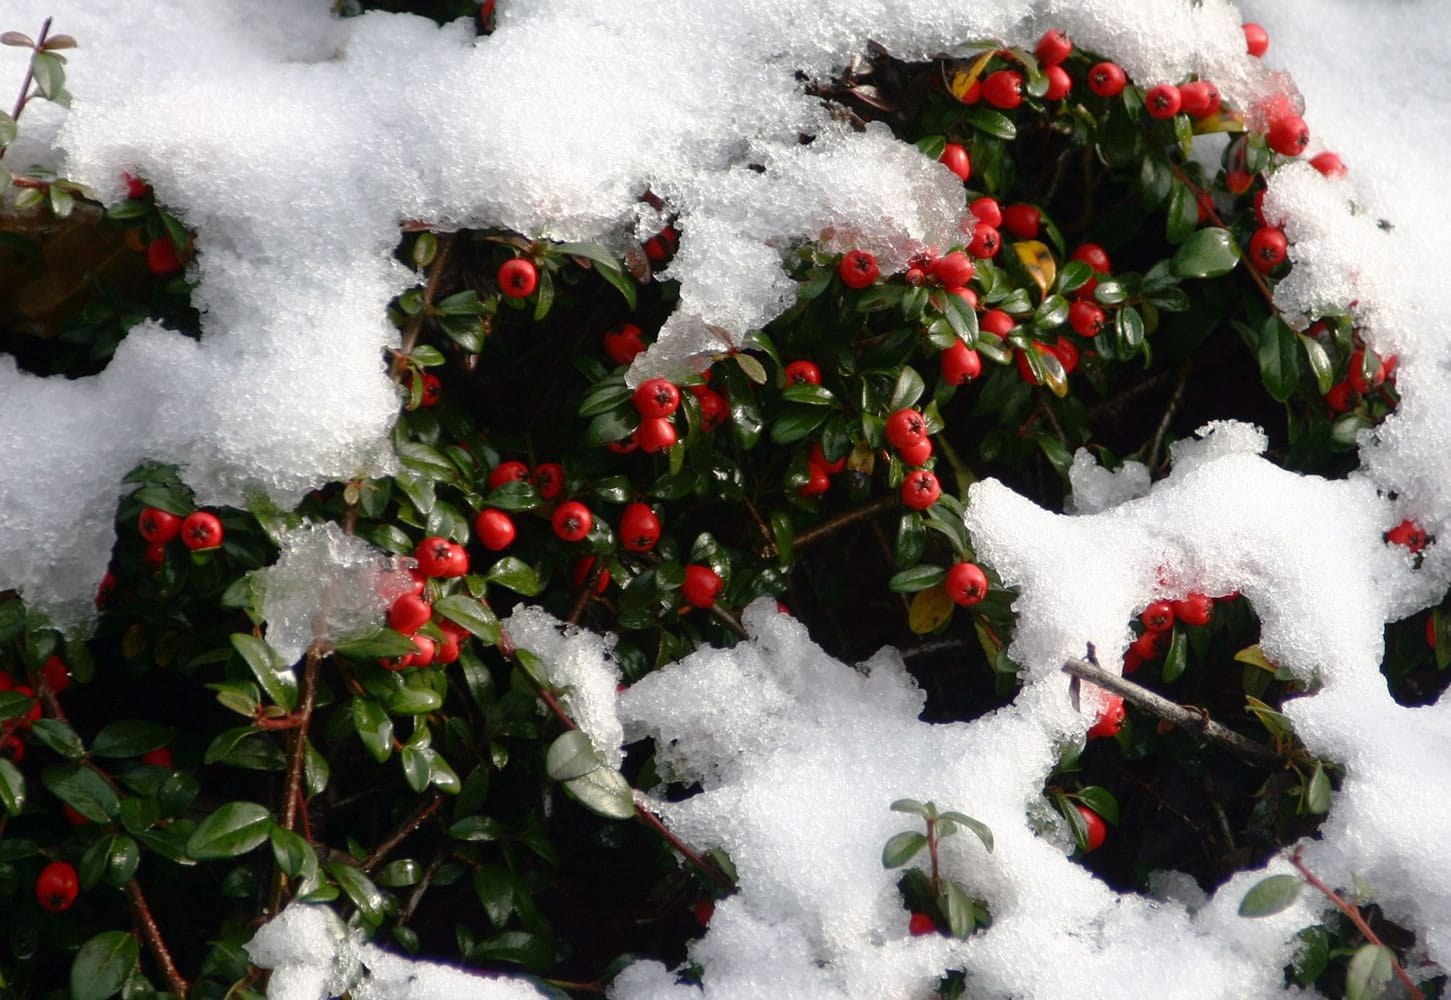 An undulating ground cover planting of Cotoneaster horizontalis takes on a festive persona after an early winter snowfall.